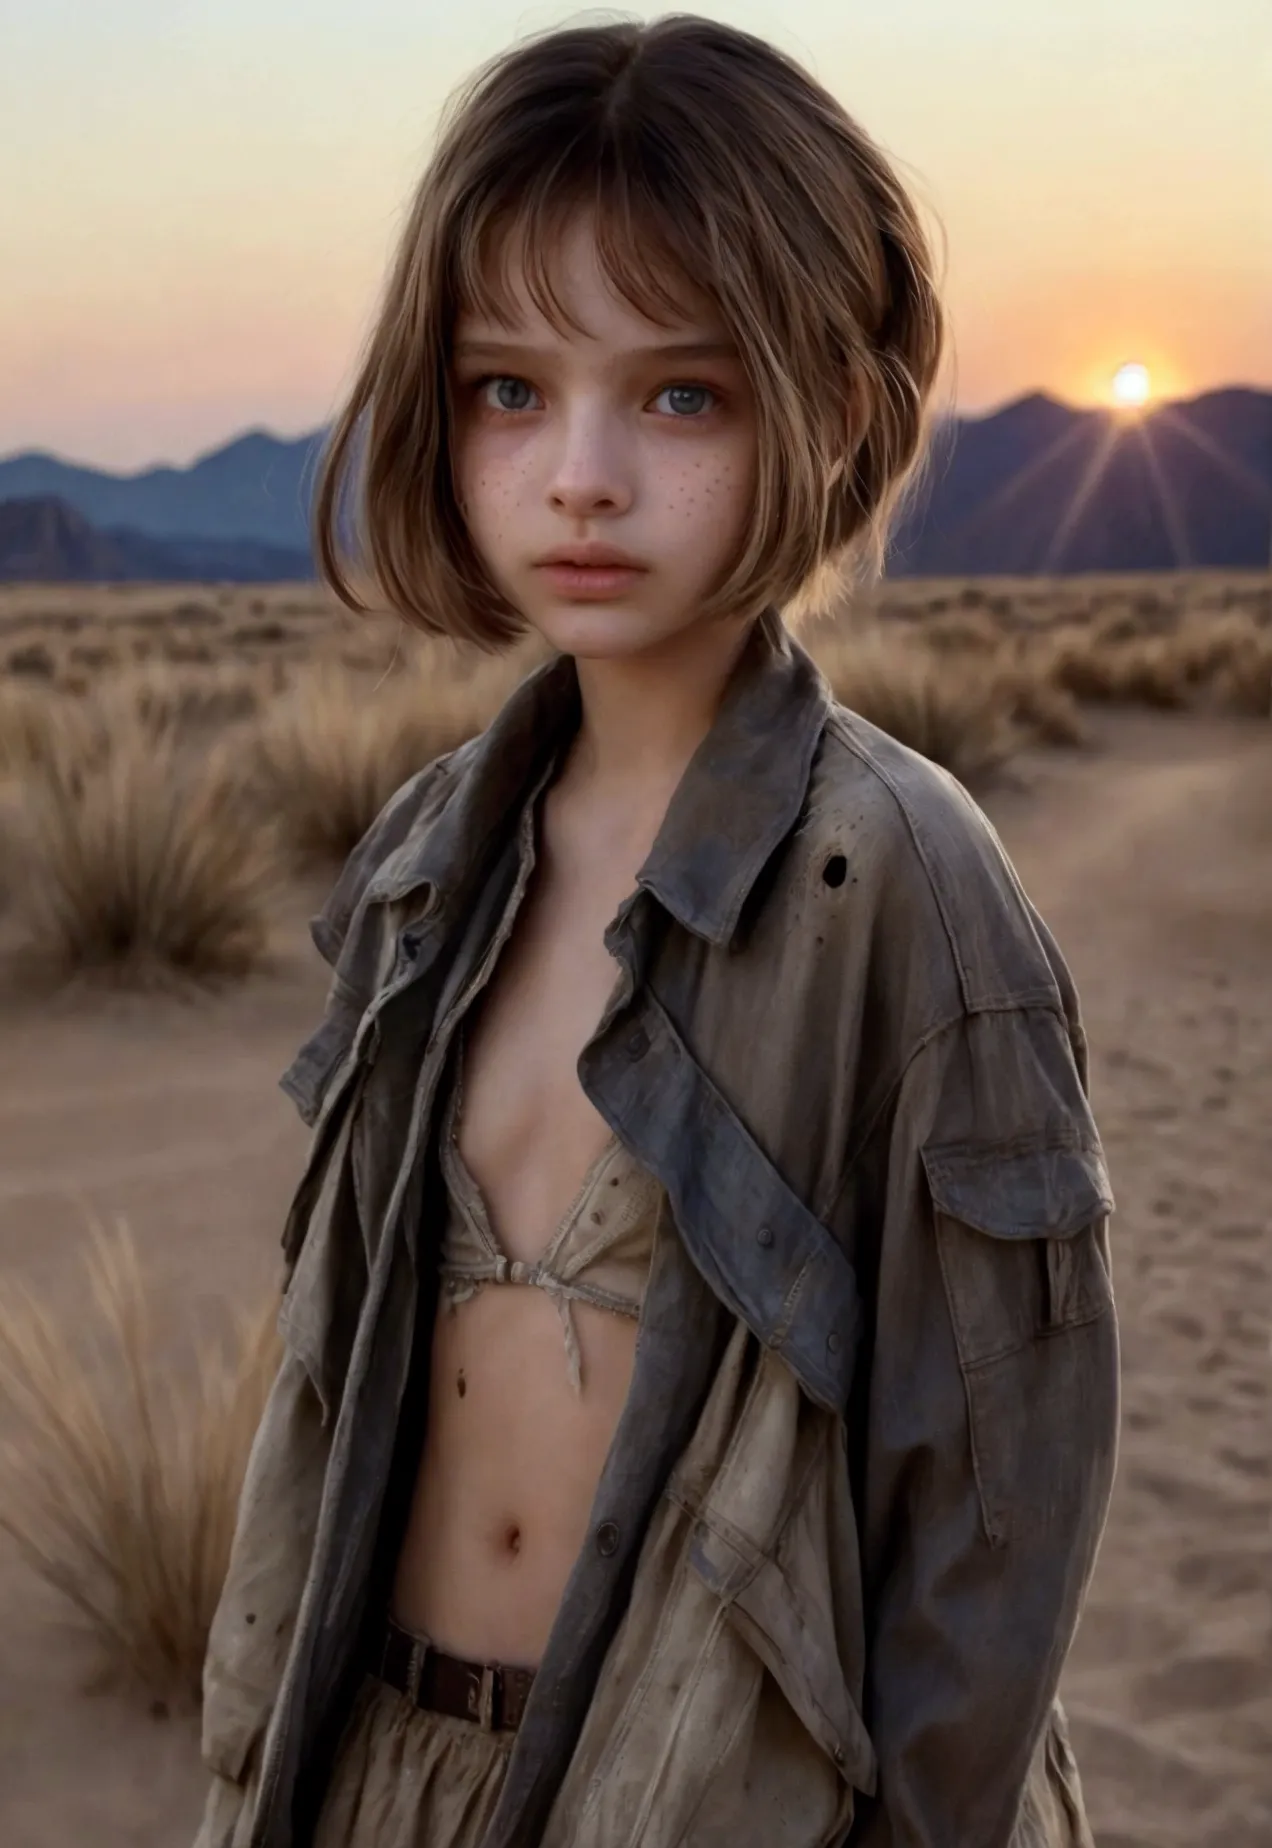 masterpiece, Half Body Shot, Transitioning desert landscape at sunset, Person walking alone, A beautiful young American girl, ag...